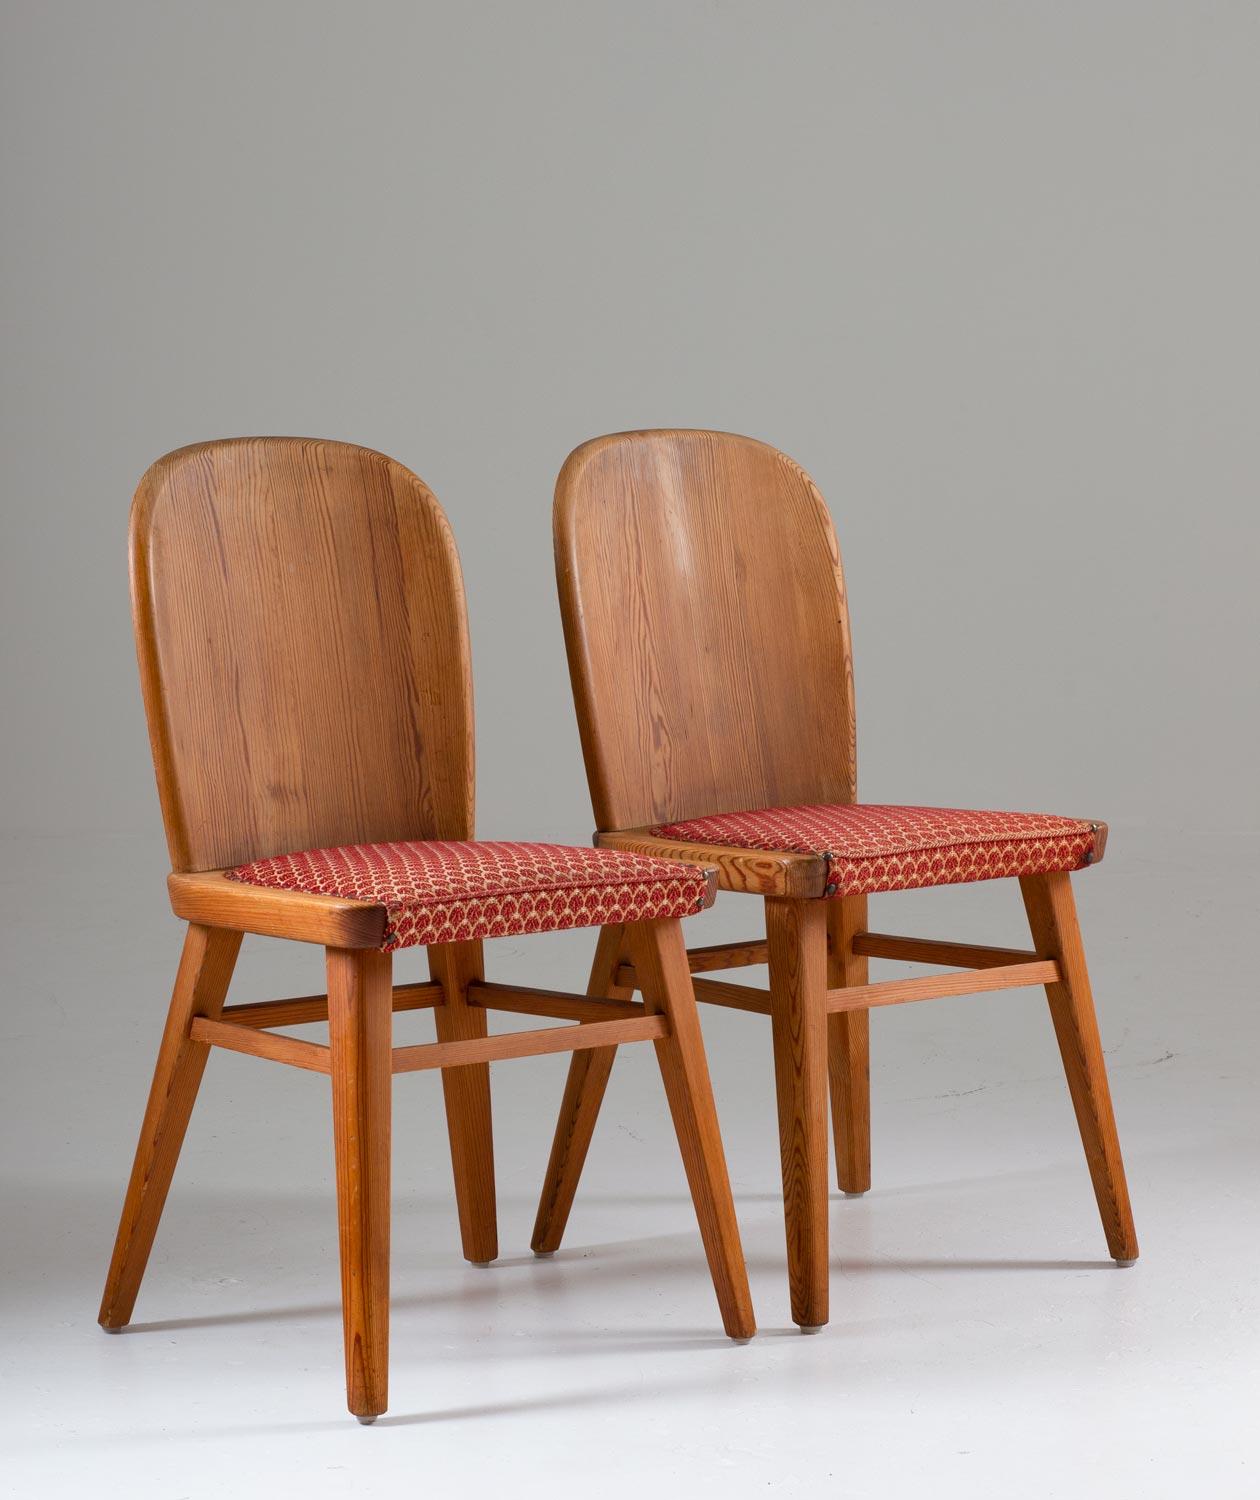 Rare chairs in pine manufactured in Sweden, circa 1940.
Beautiful, high quality chairs with curved backrest and original upholstery on the seats.

Condition: Very good original condition.
 